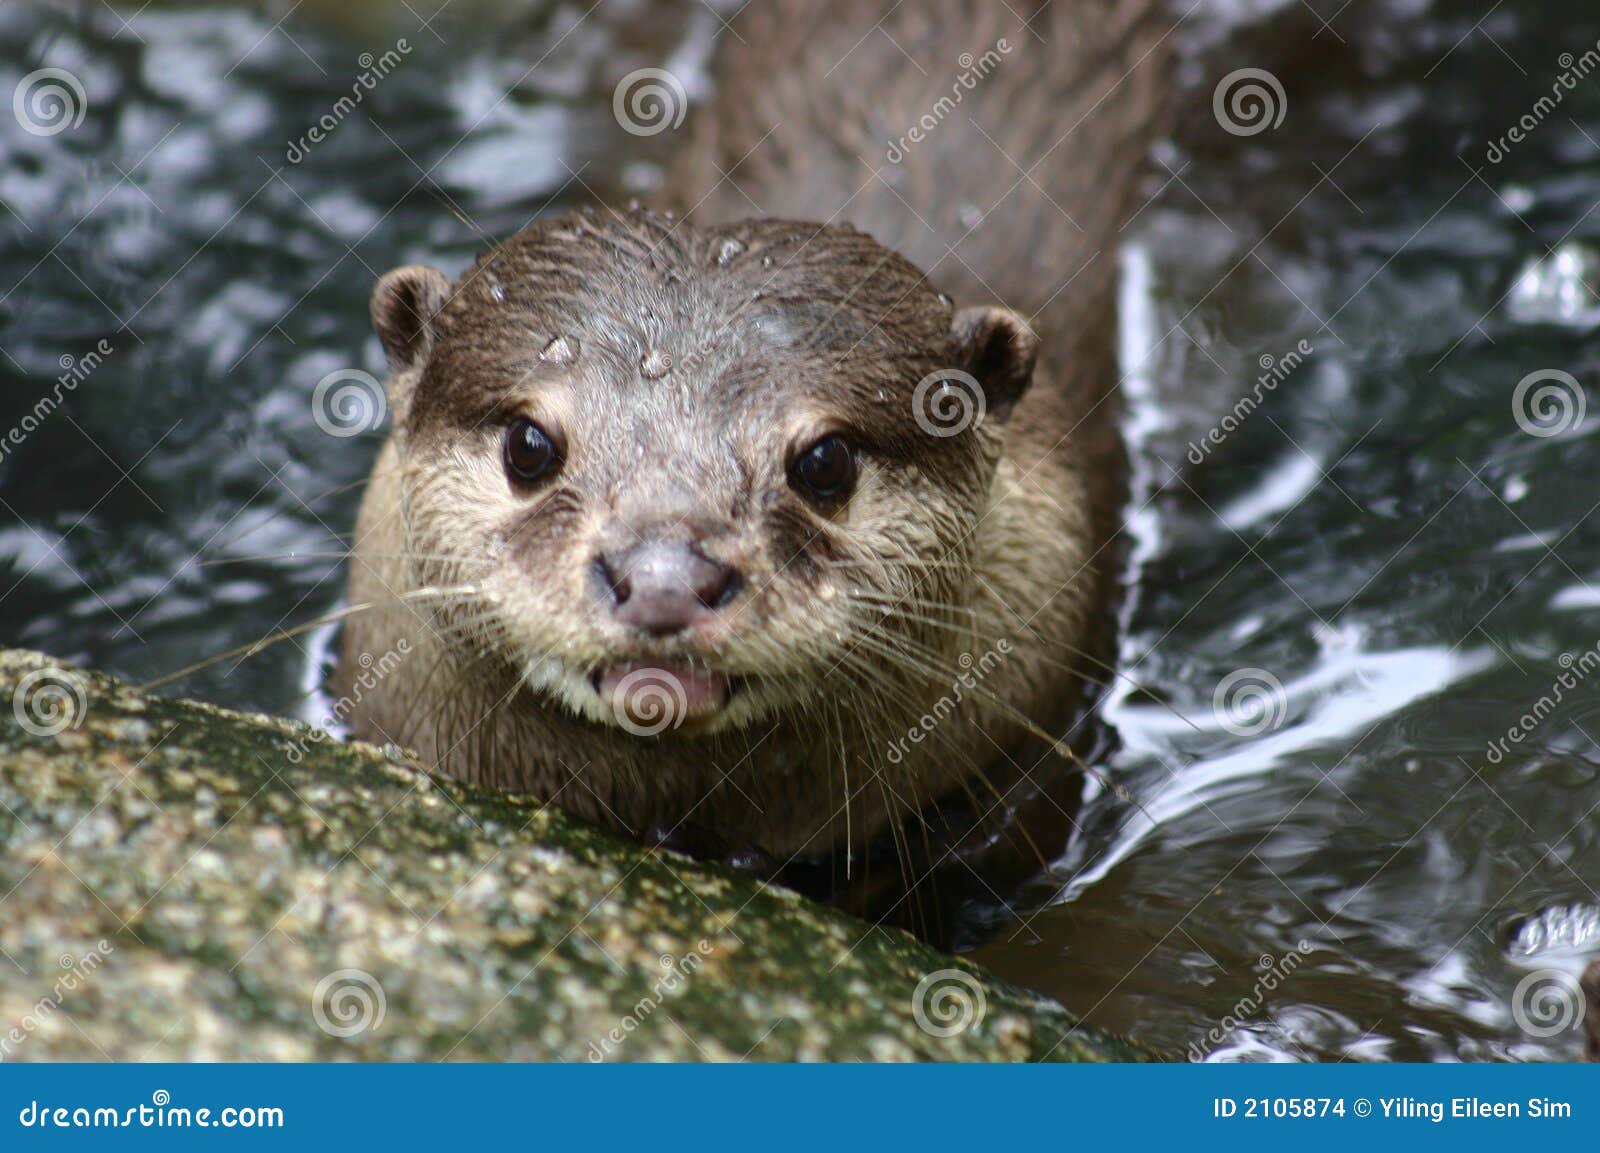 Otter Stock Images - Image: 2105874